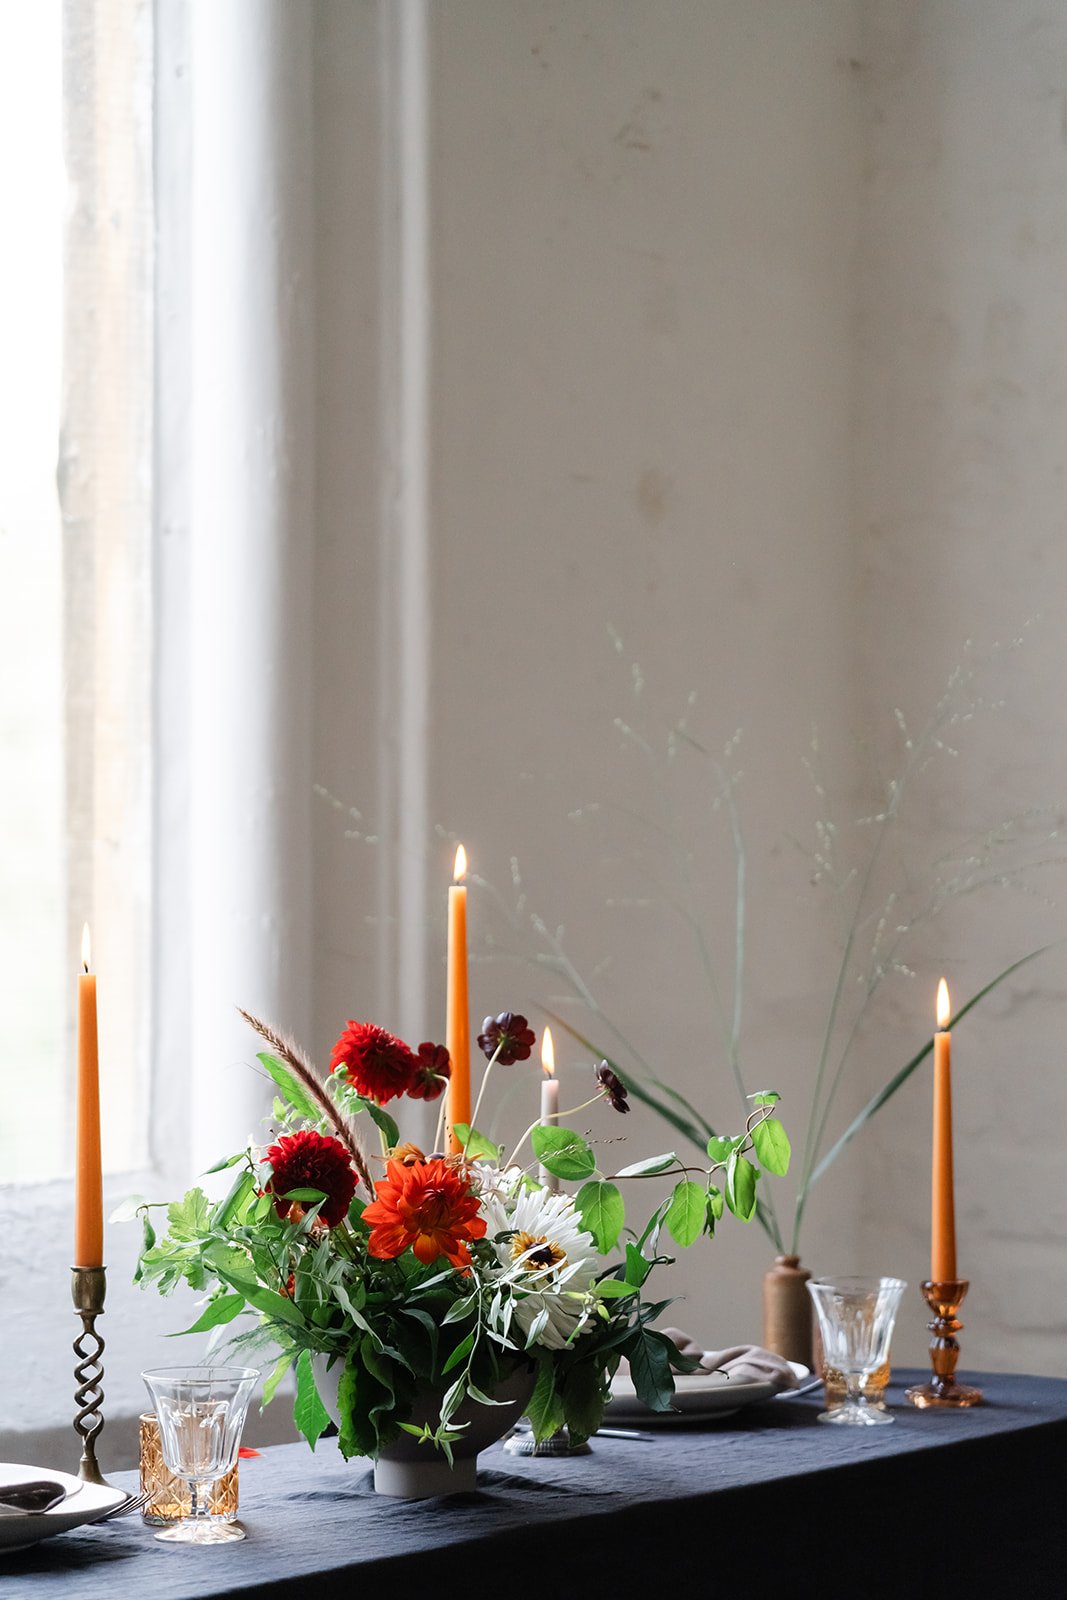 Flowery table centrepiece set on a dark clothed table with candles